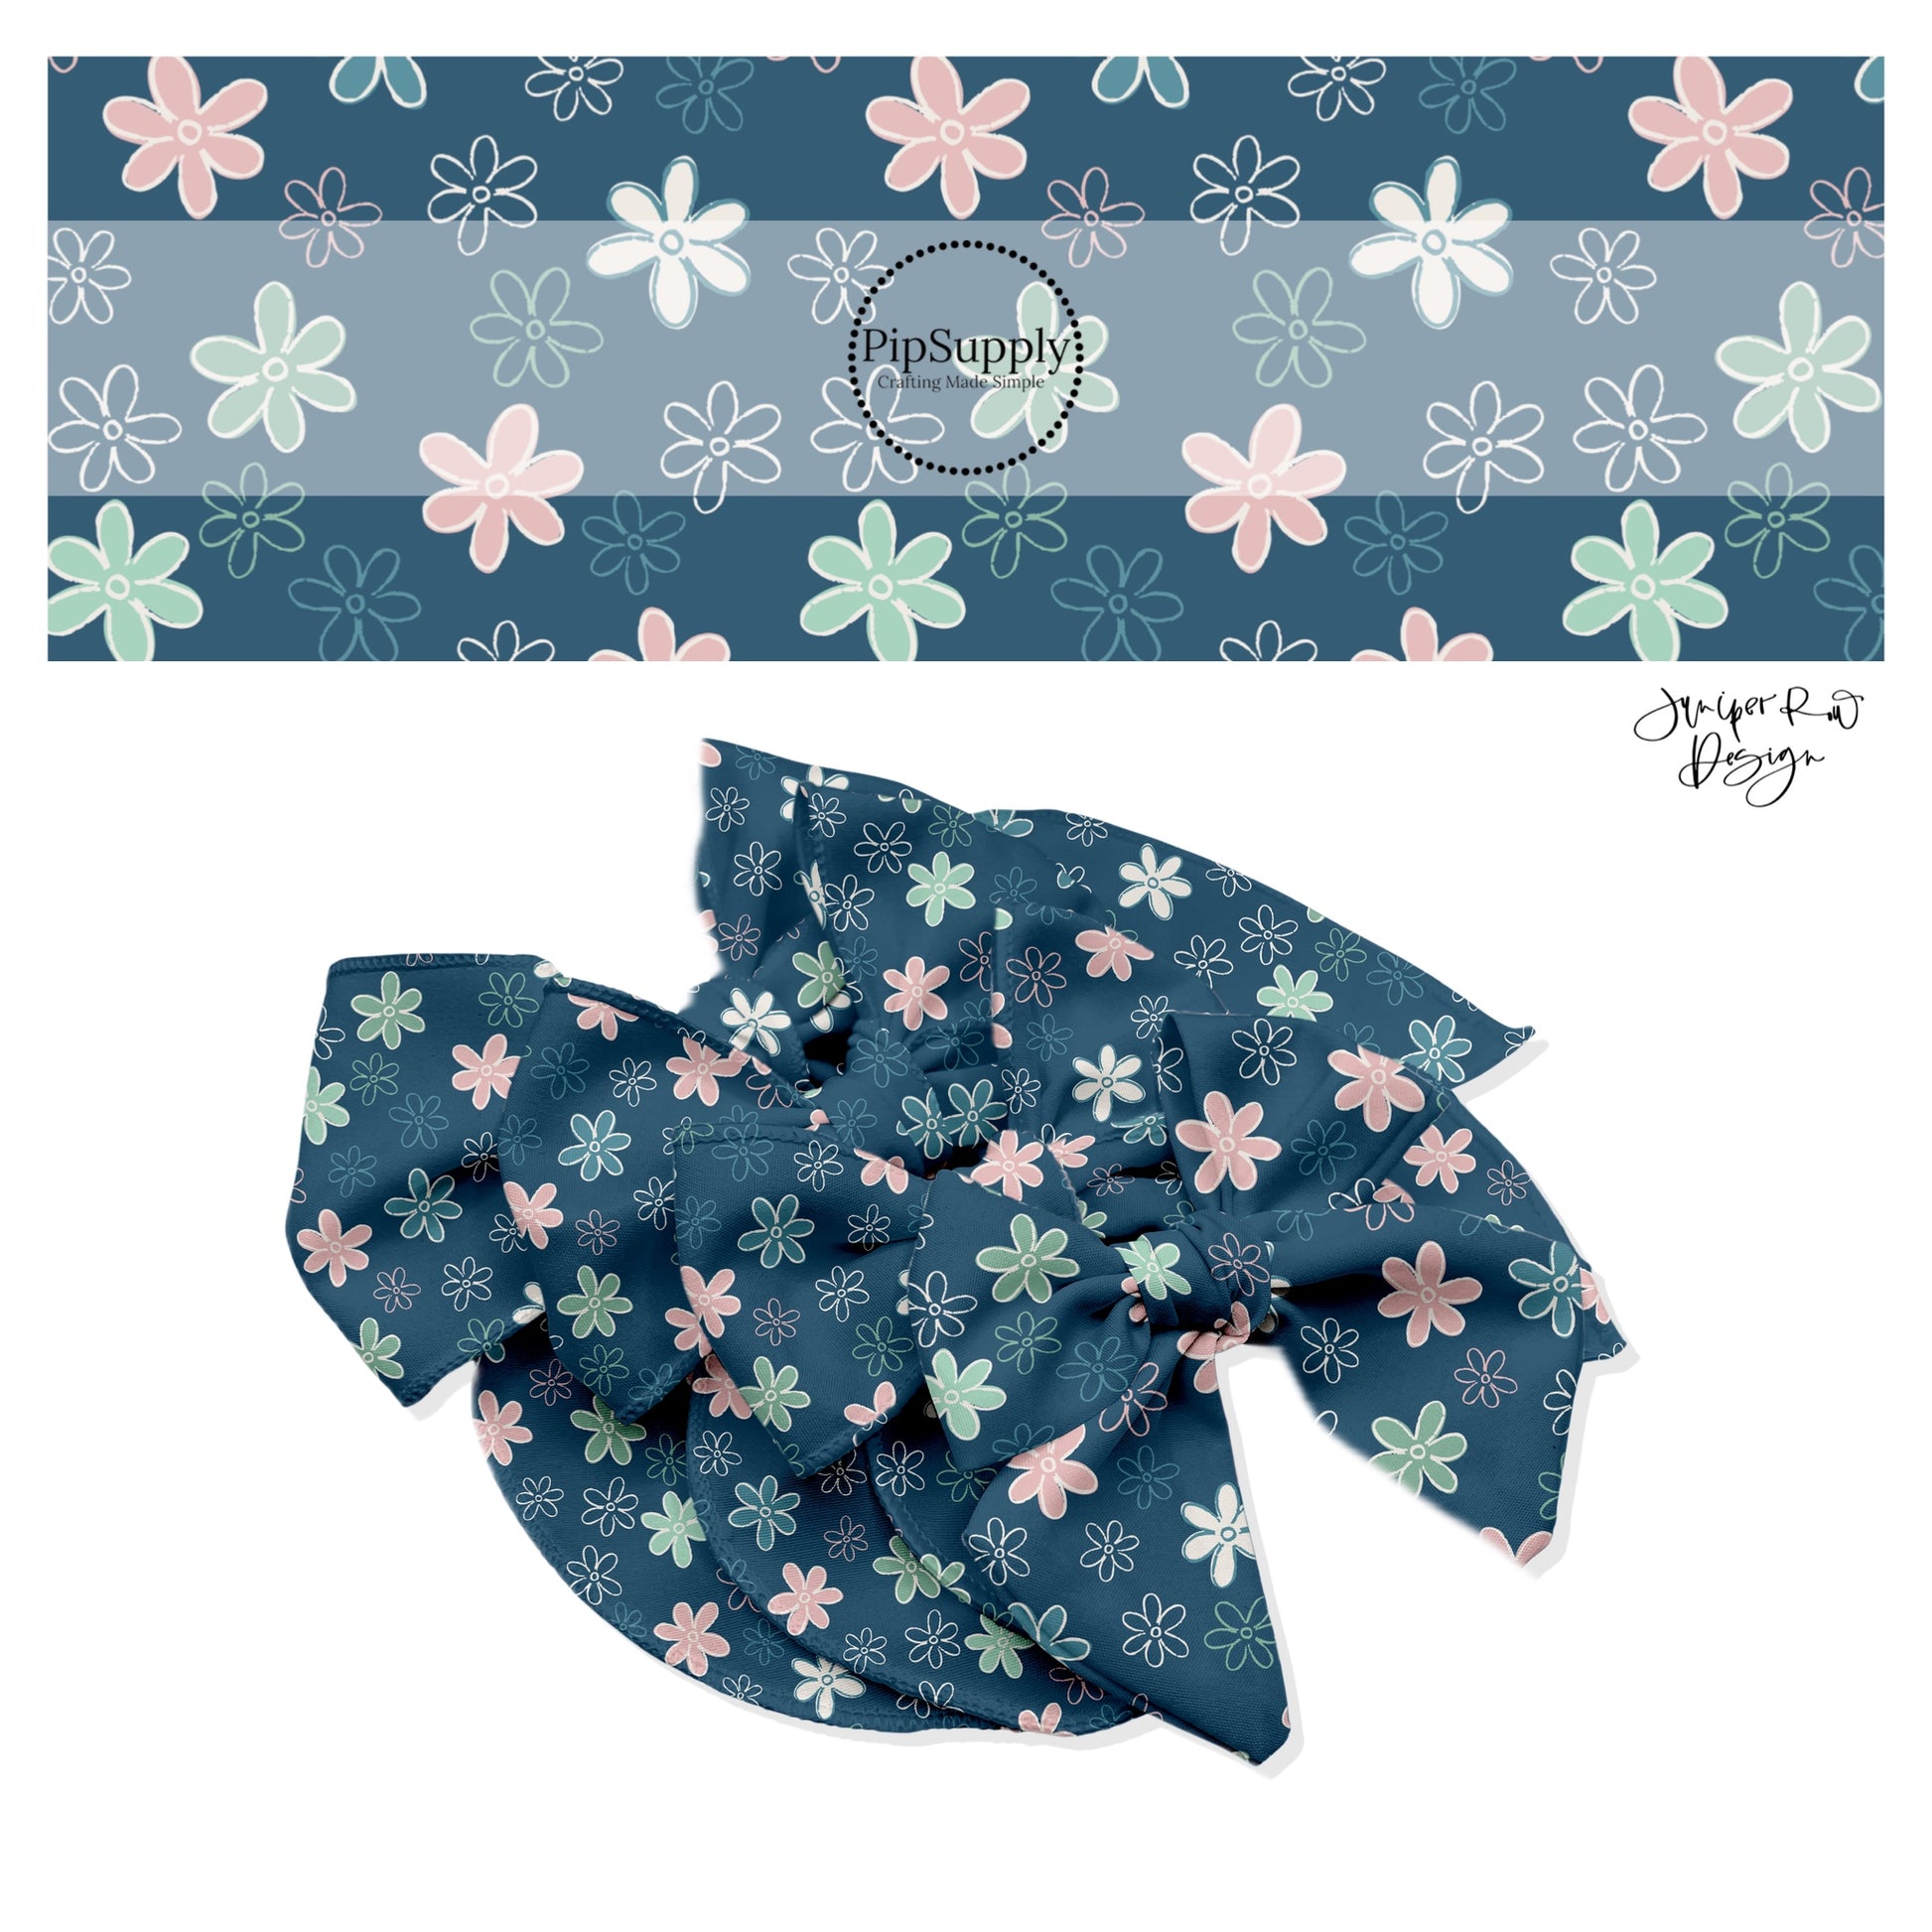 Pink, green, blue, and white drawn flowers on navy bow strips